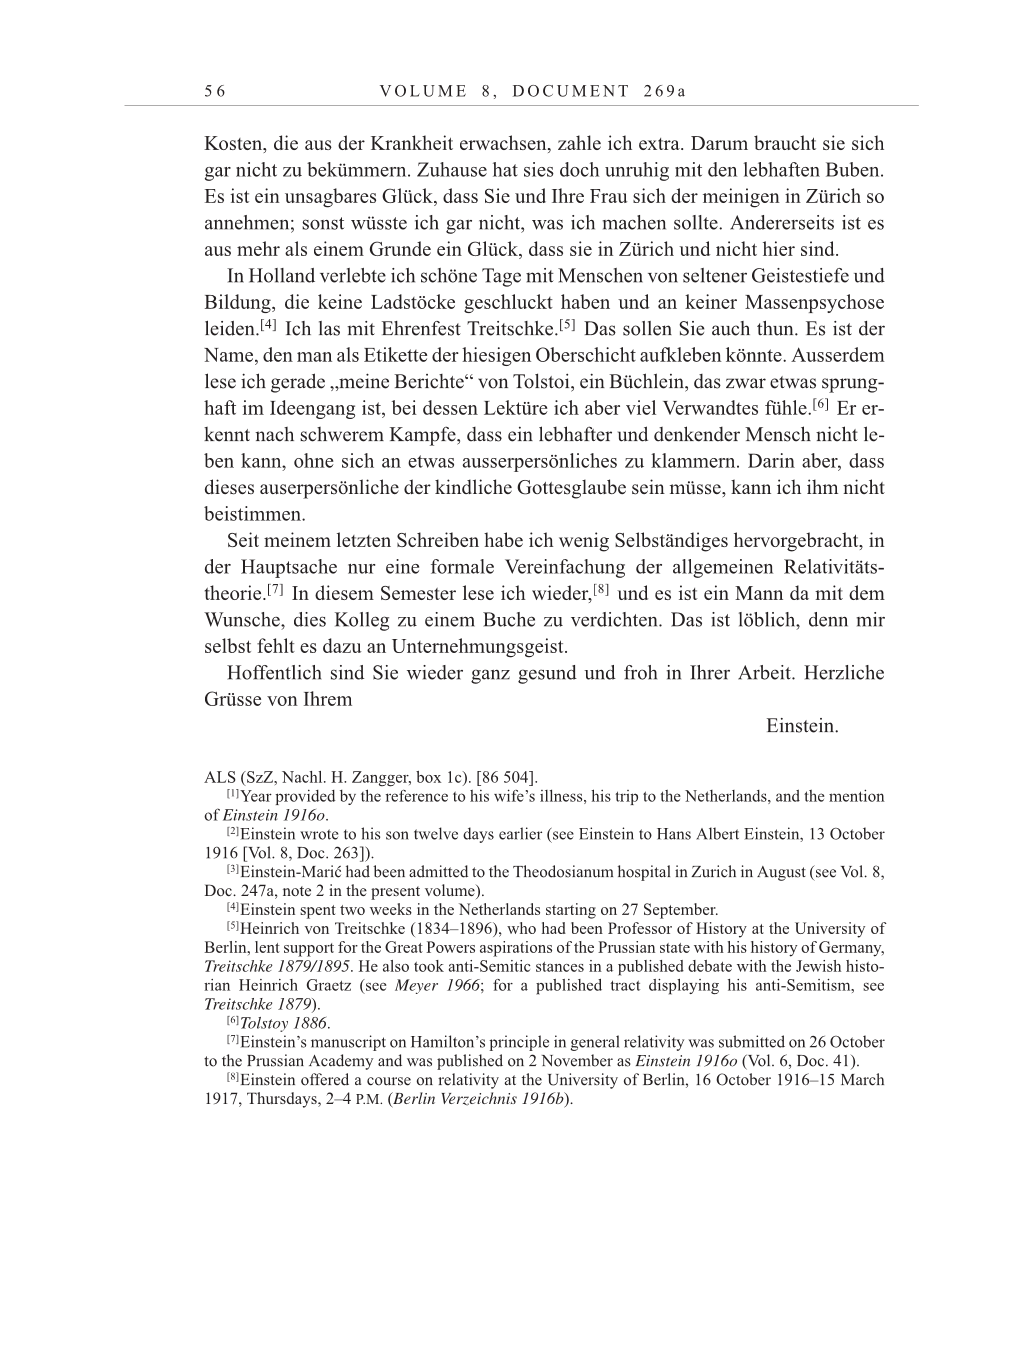 Volume 10: The Berlin Years: Correspondence May-December 1920 / Supplementary Correspondence 1909-1920 page 56